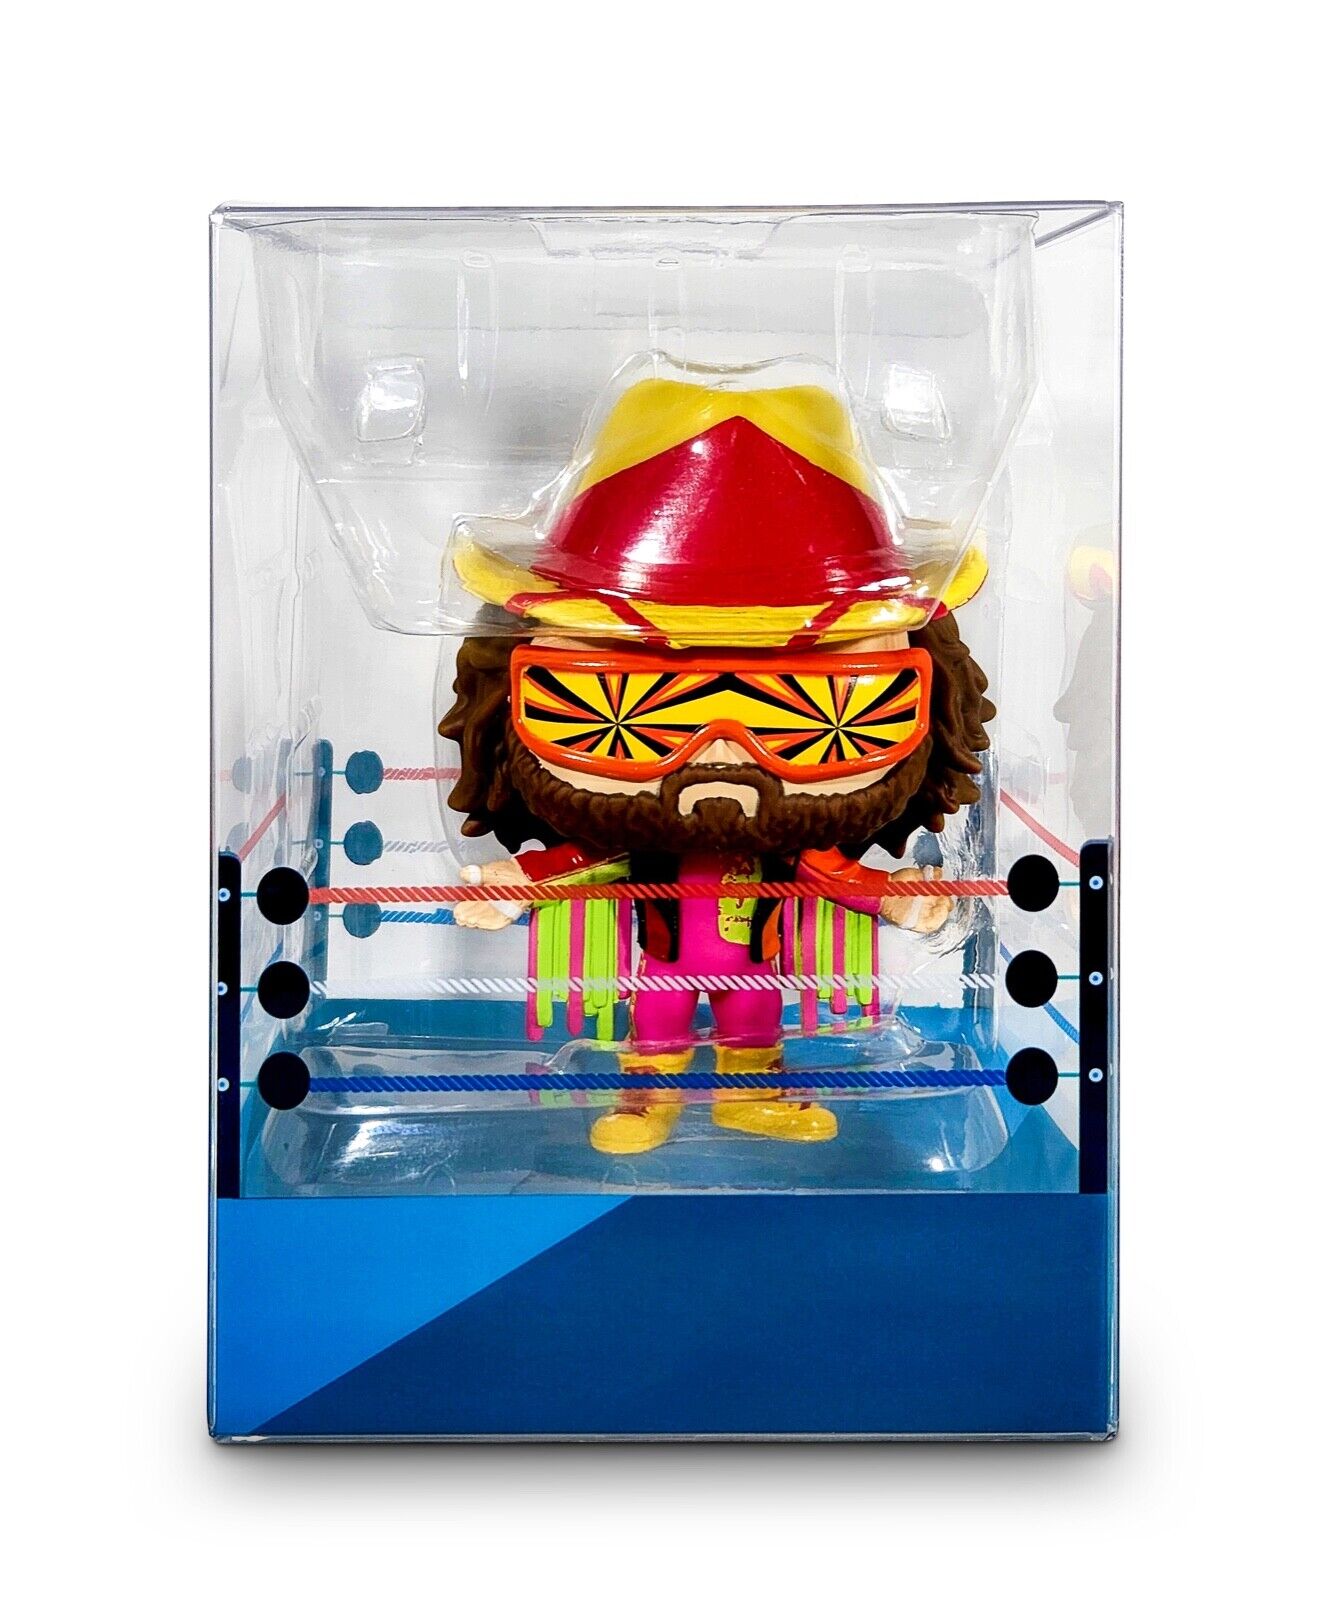 Wrestling Ring Design Box Protector compatible with 4 inch Funko Pops